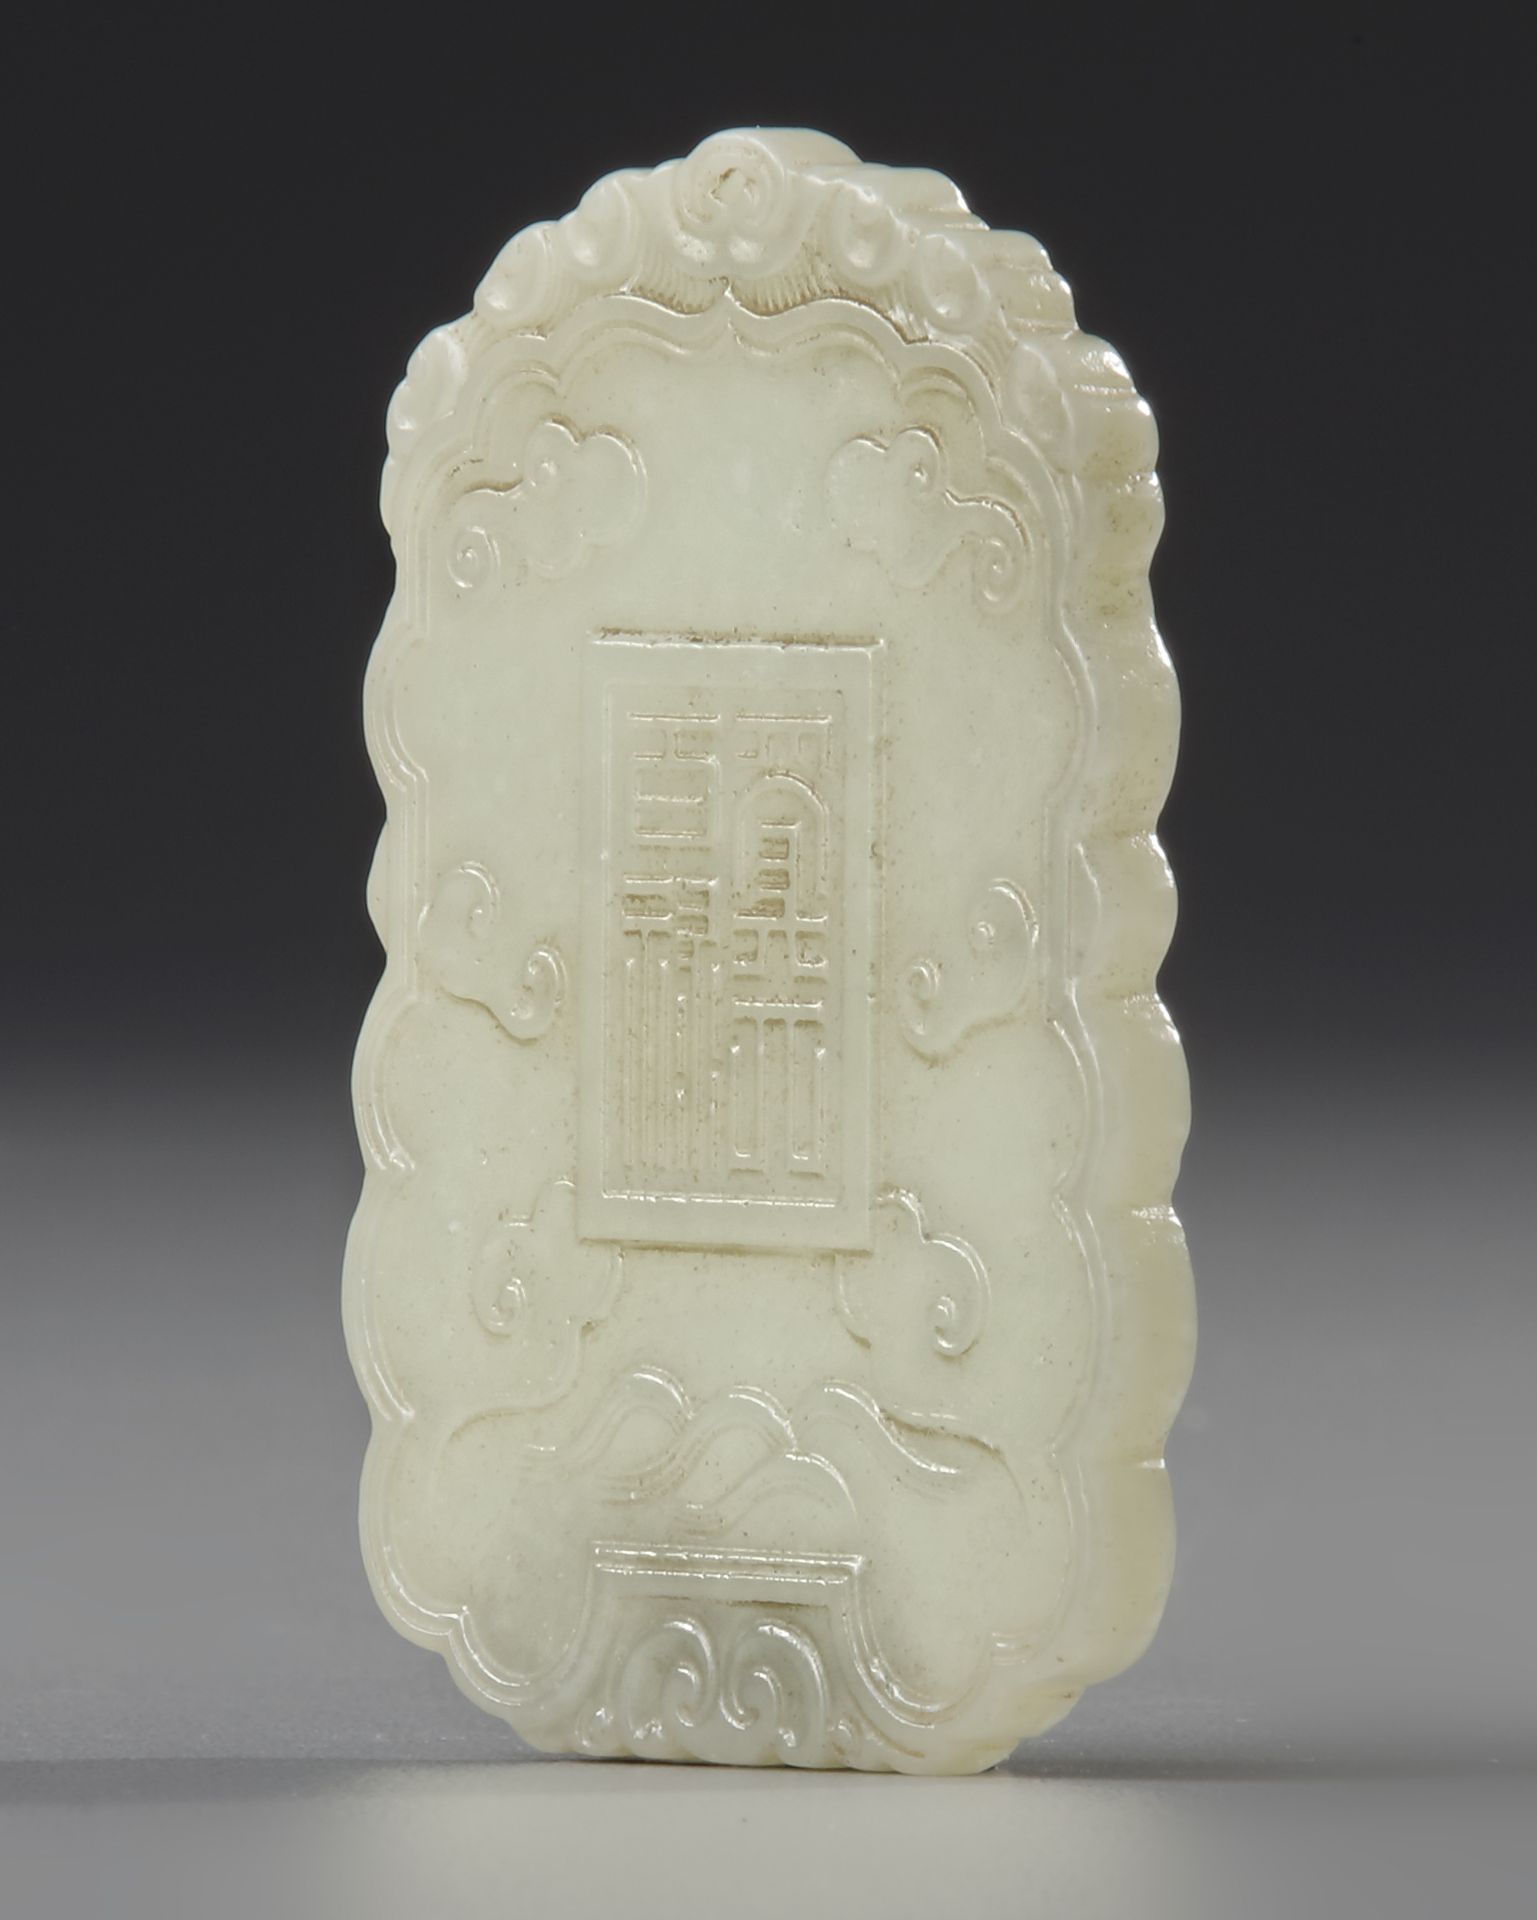 A CHINESE JADE CARVED PLAQUE, QING DYNASTY (1644-1911) - Image 2 of 4